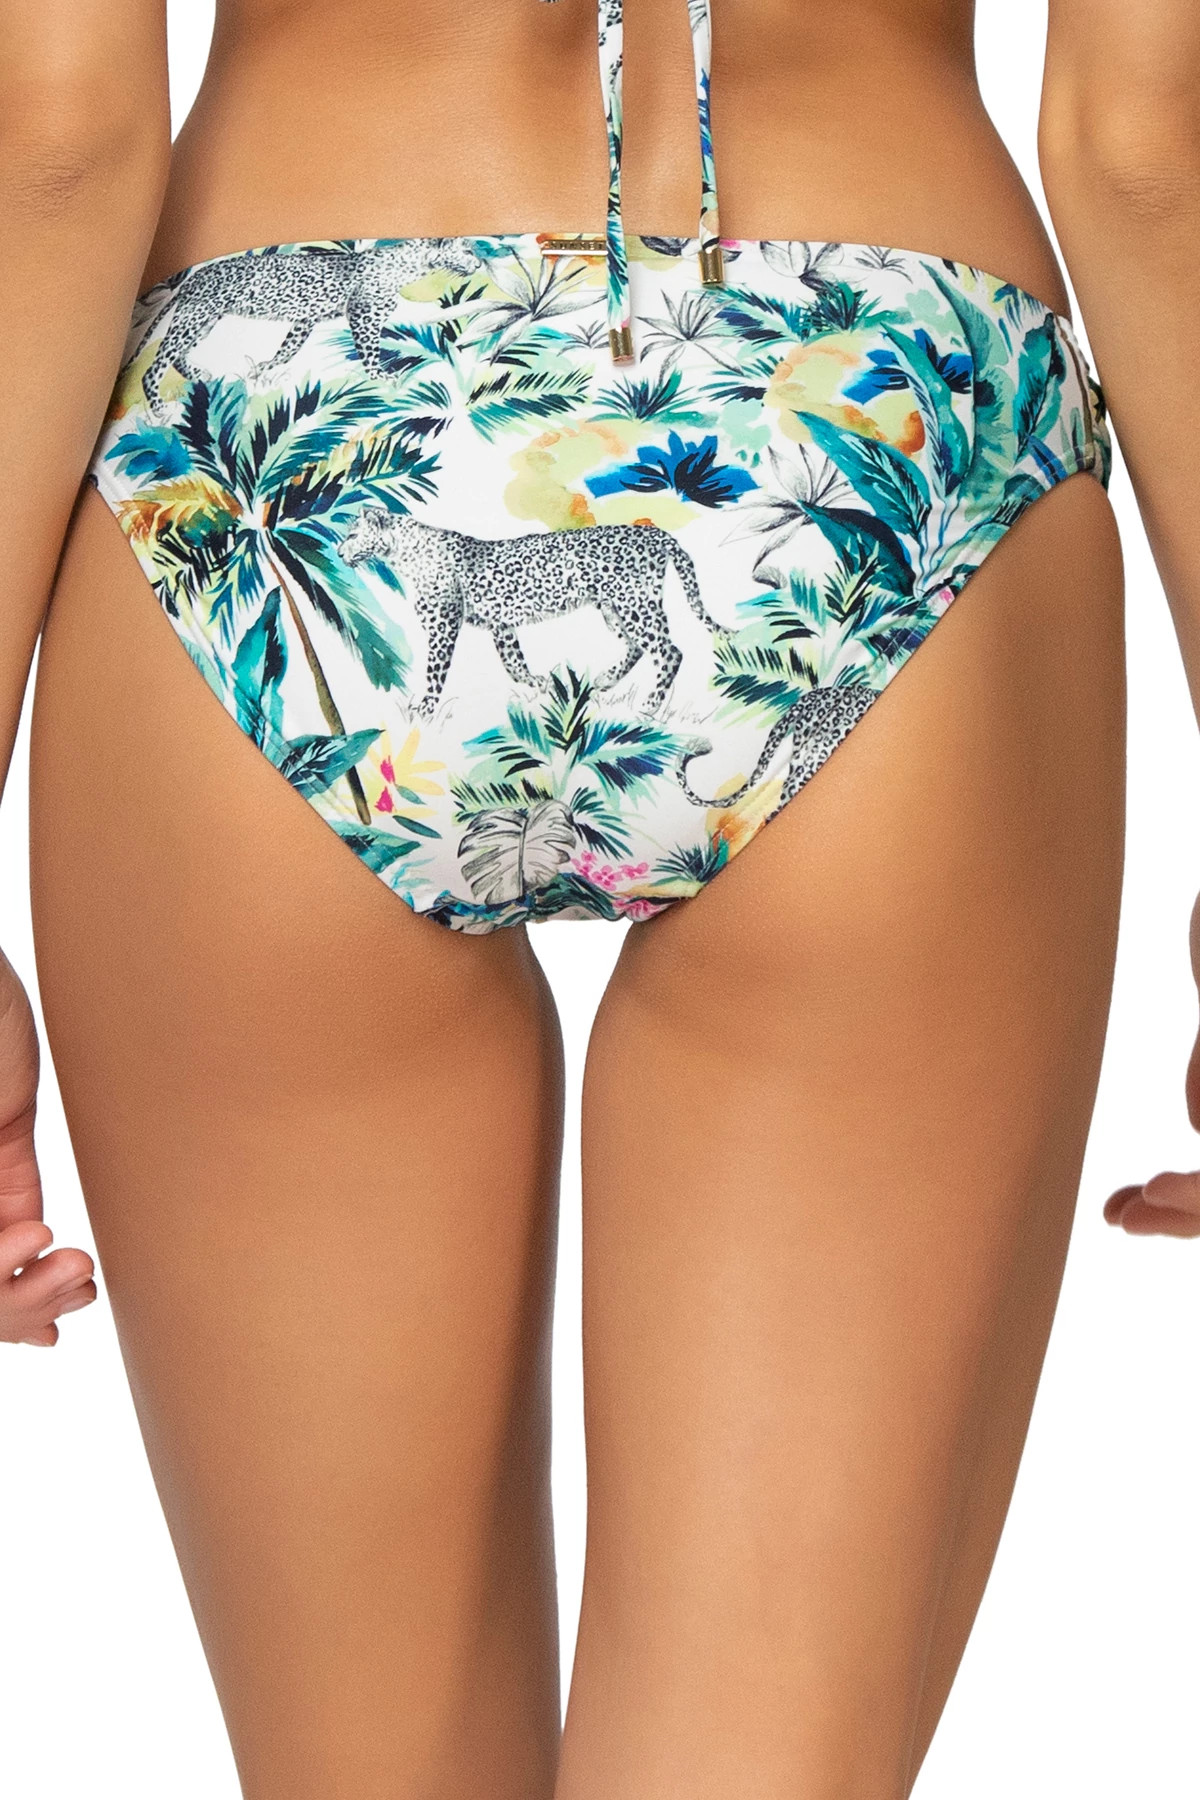 INTO THE WILD Femme Fatale Tab Side Hipster Bikini Bottom image number 2